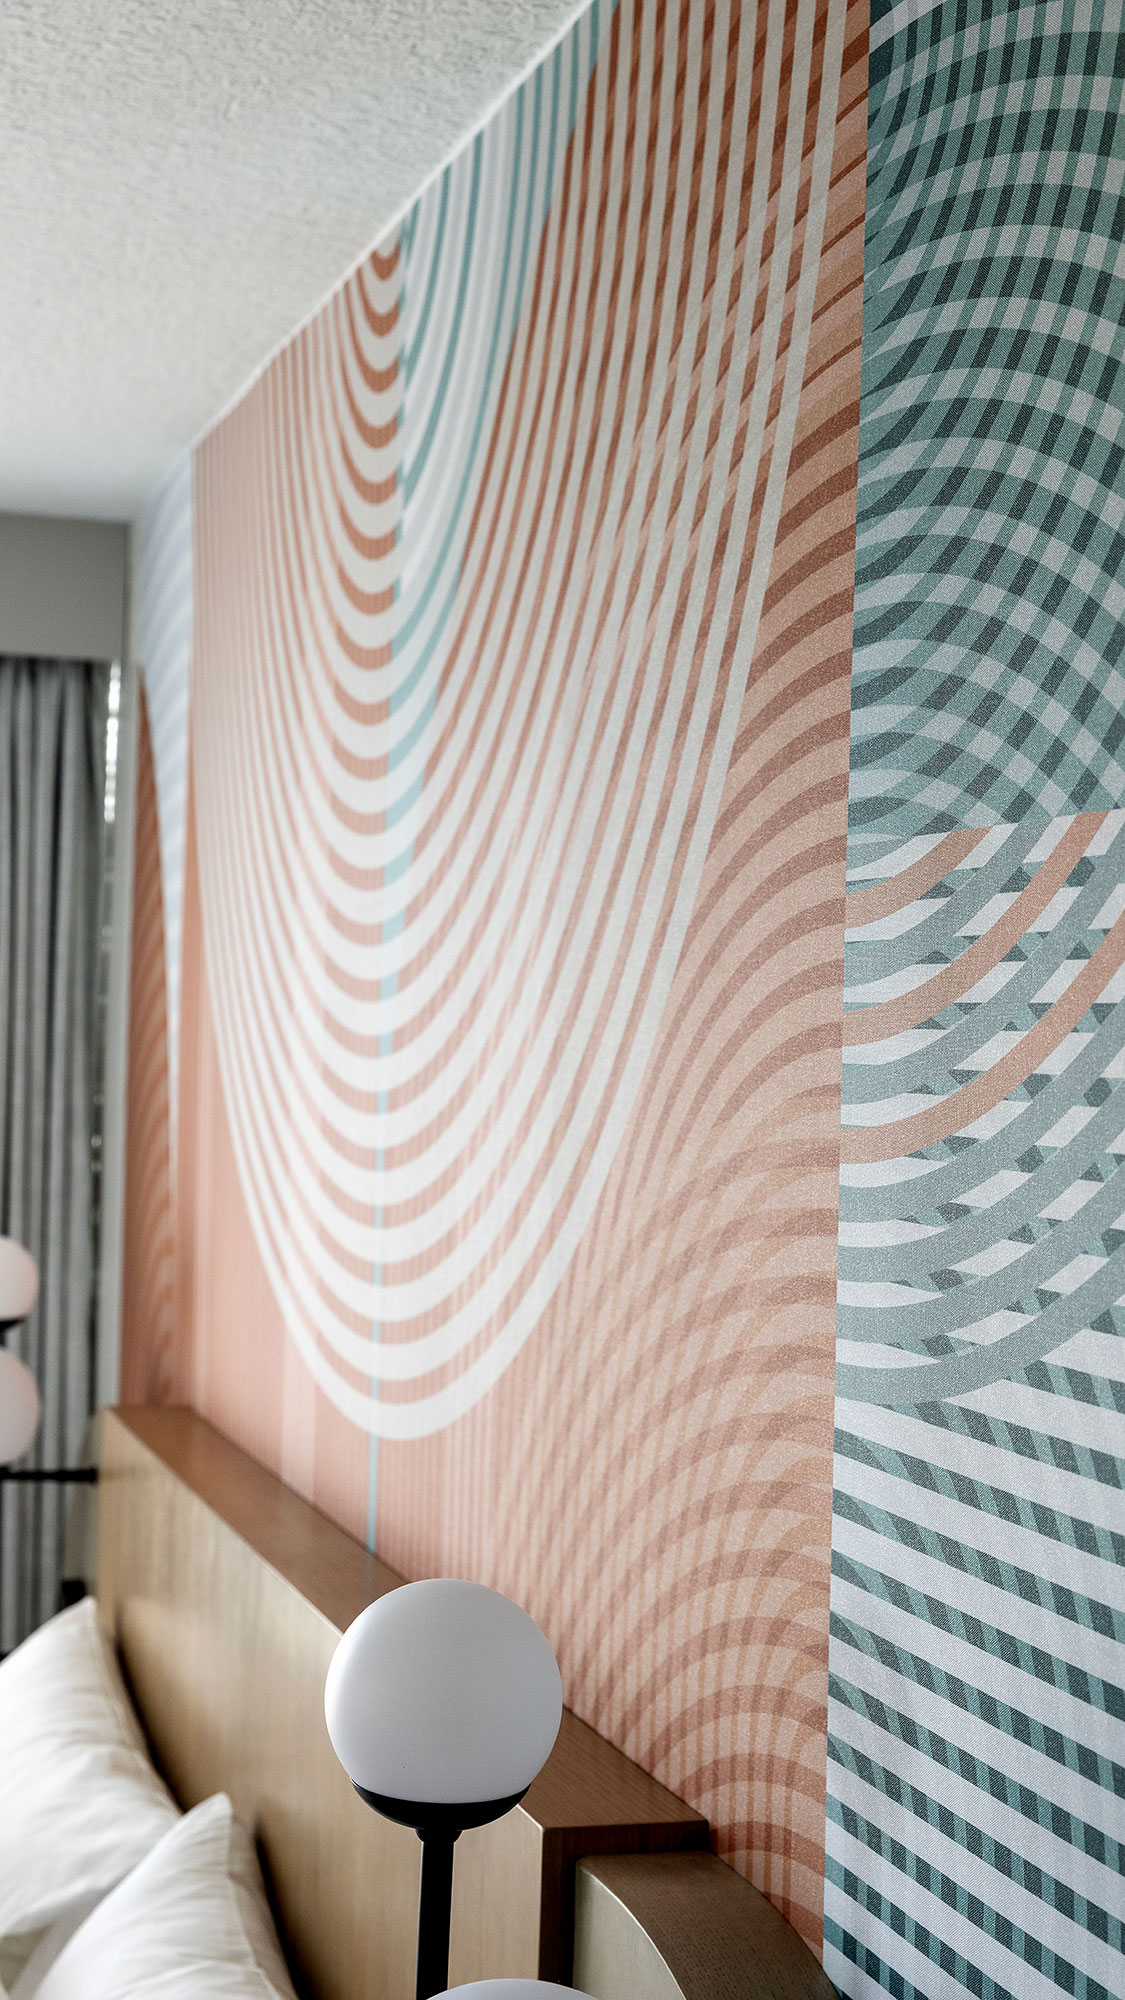 The graphic lines of the hotel room wall